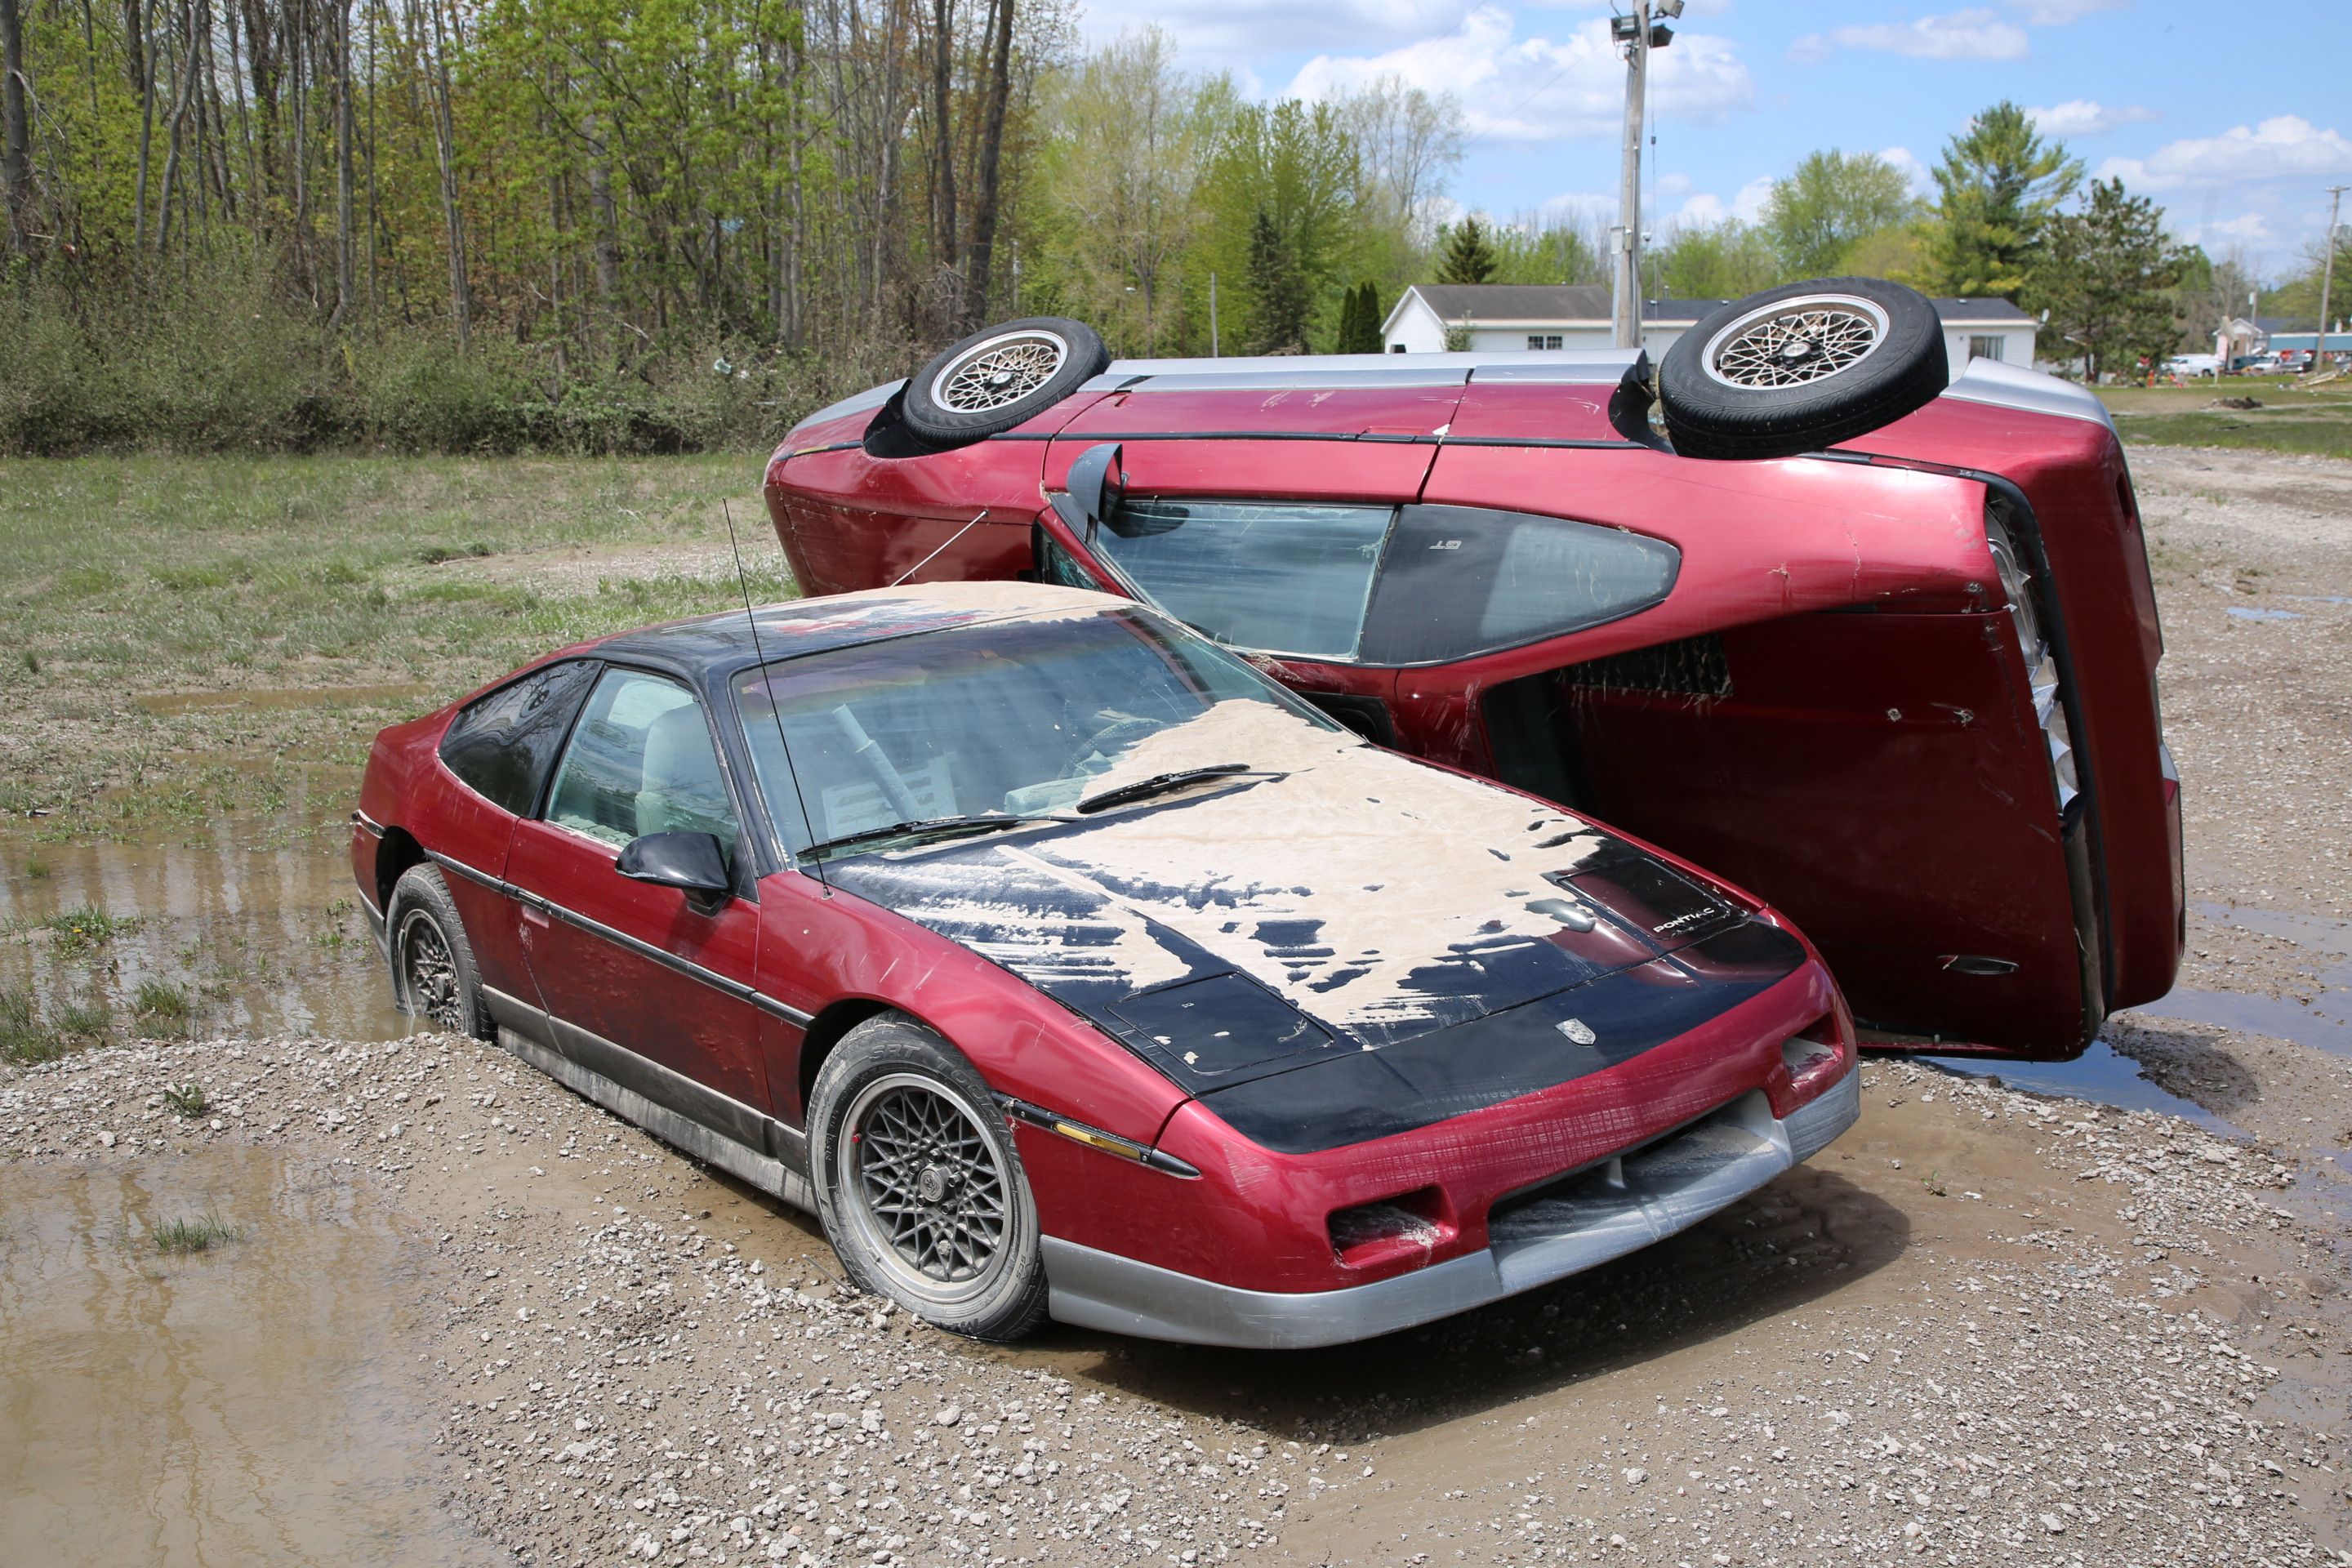 Man's Pontiac Fiero collection destroyed in mid-Michigan flooding